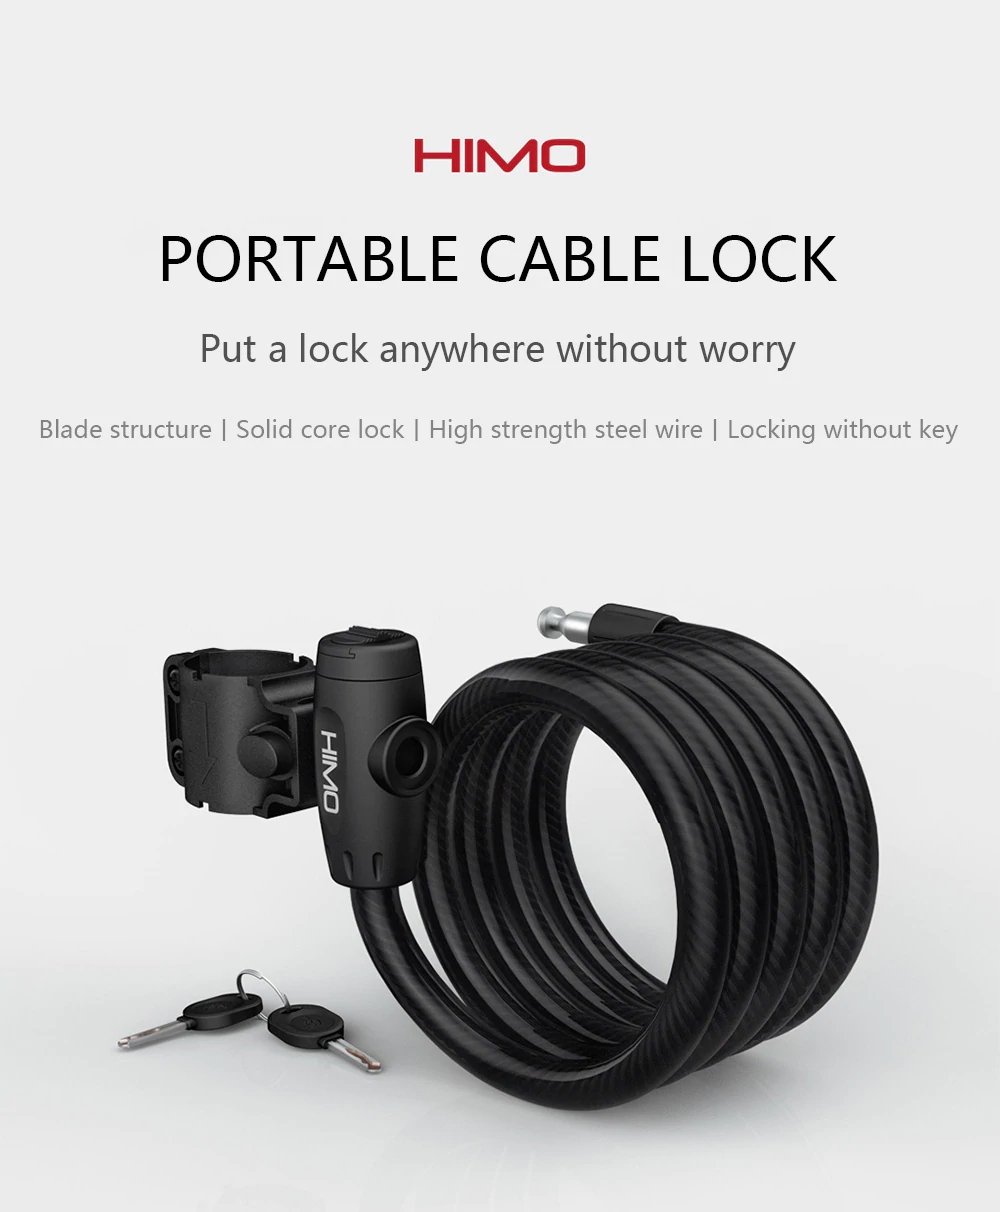 HIMO L150 Portable Folding Cable Lock Electric Bicycle Lockstitch - Black